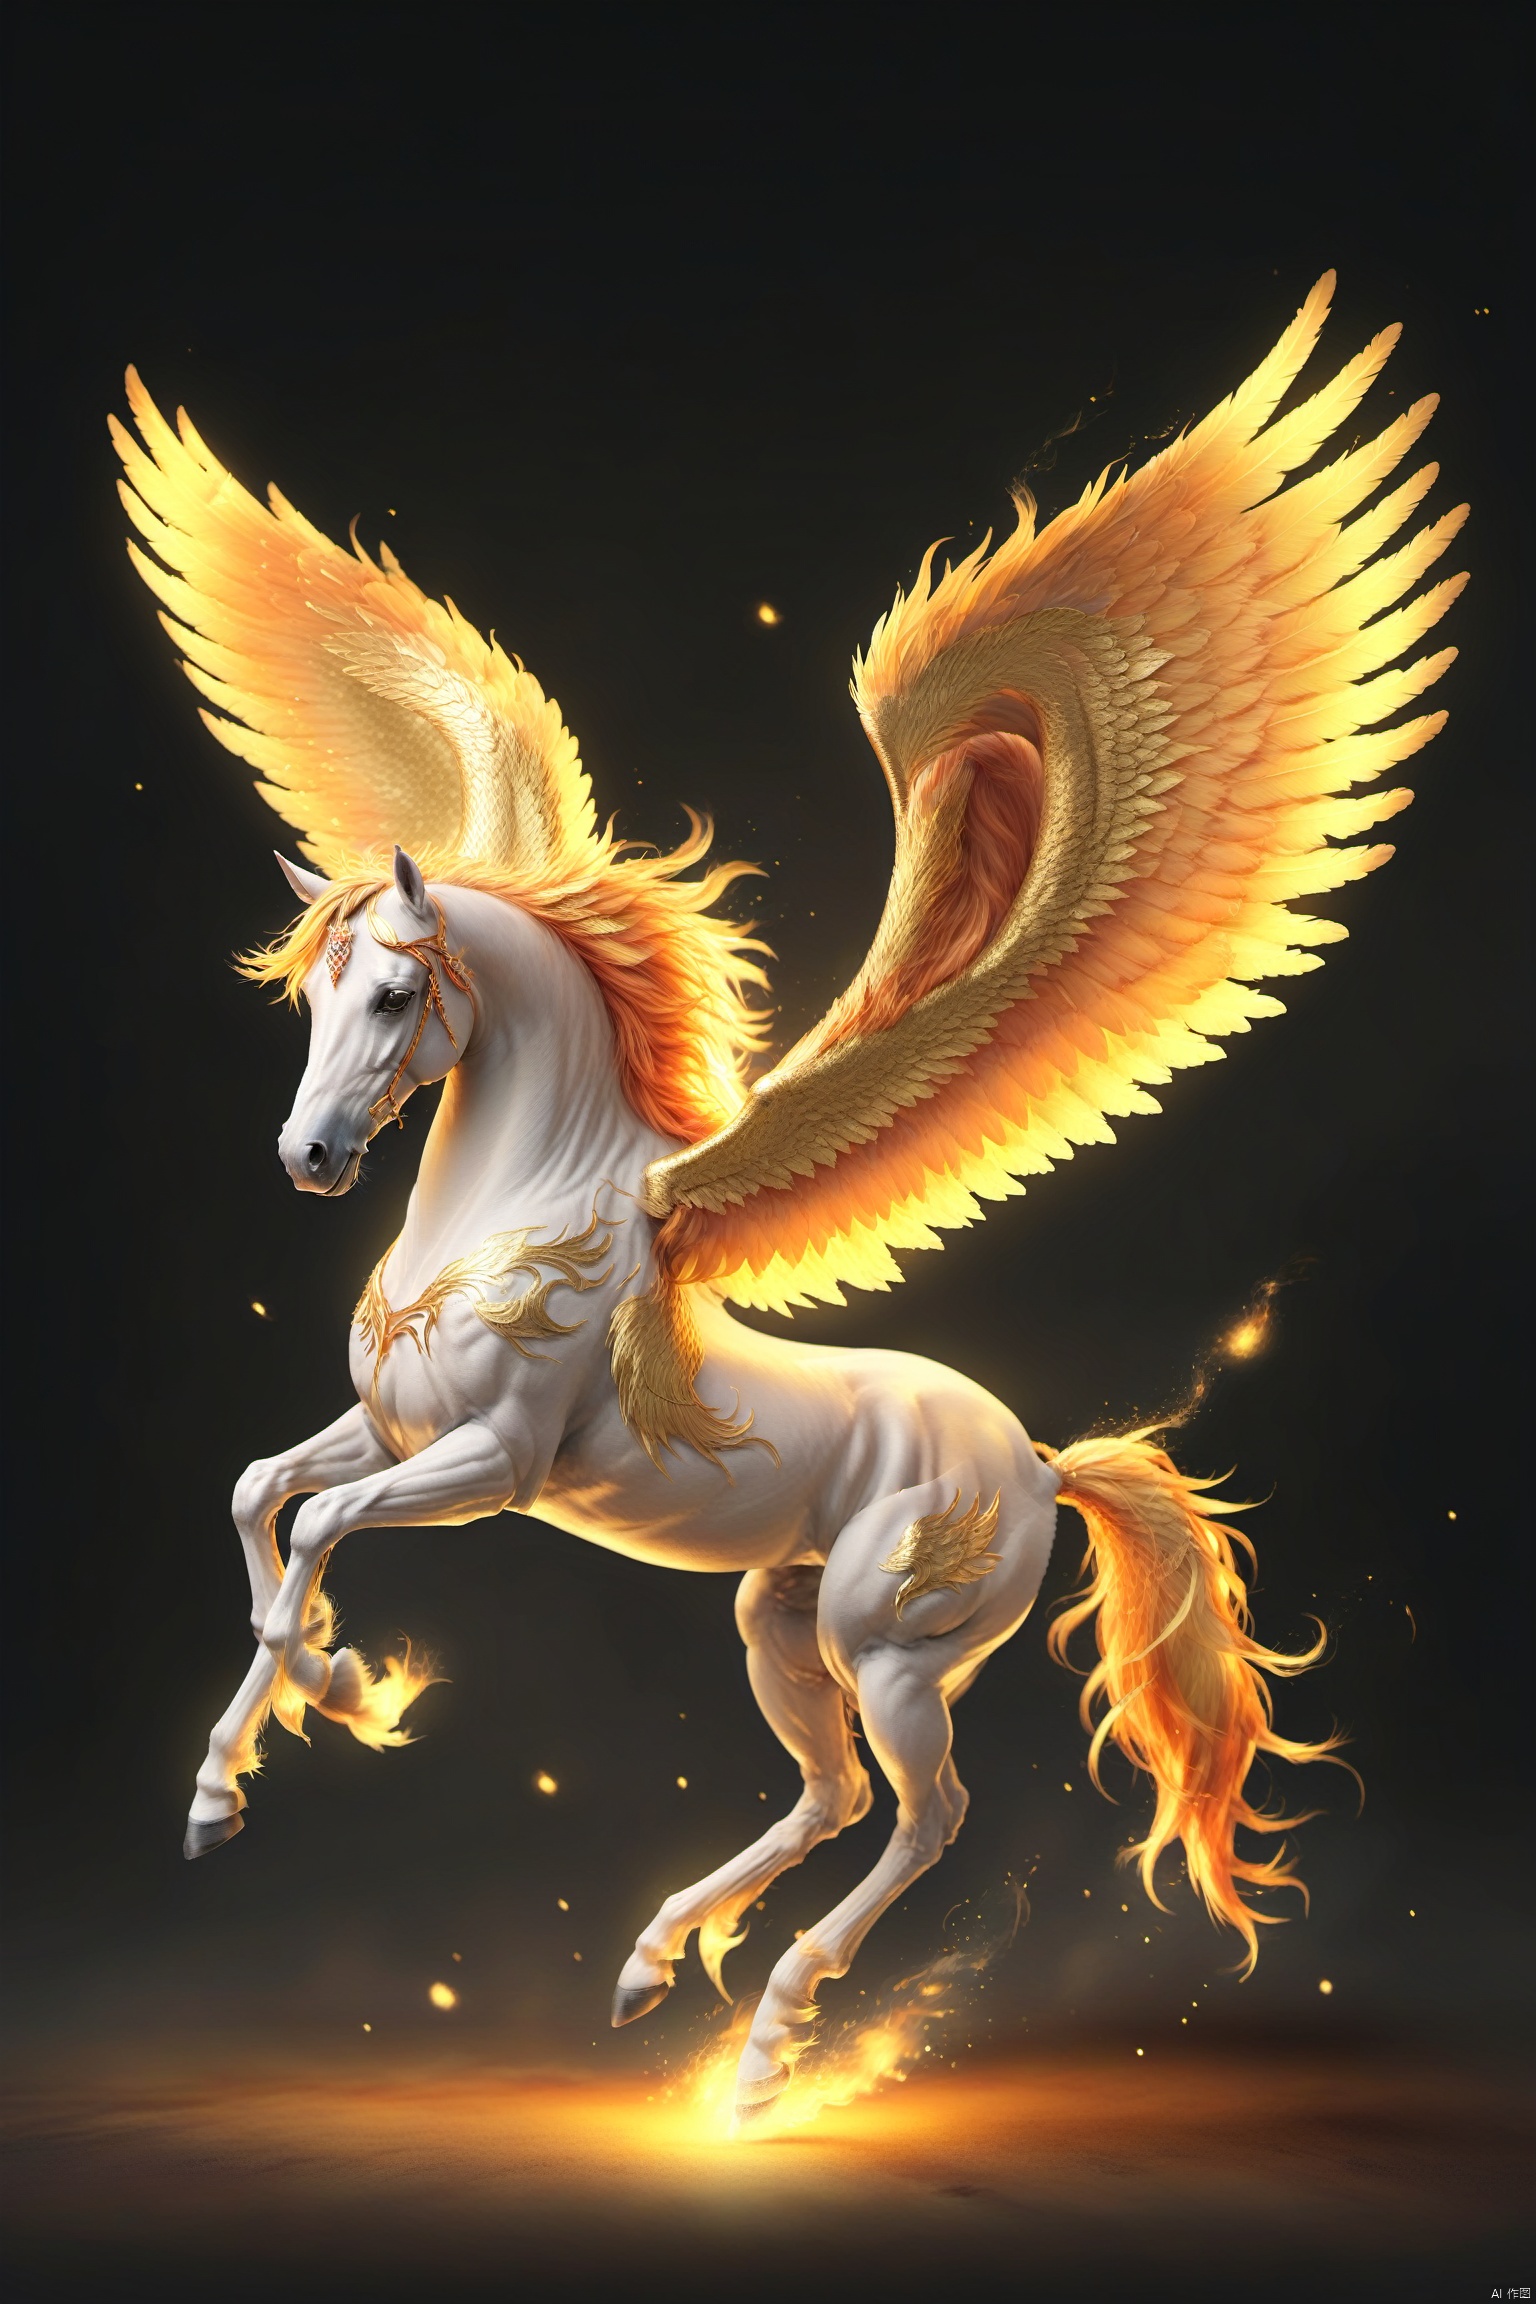 Flame-Winged Pegasus, A majestic steed with the body of a horse and the wings of a bird. Its wings are adorned with feathers that shimmer like flames, casting a warm, golden glow wherever it flies. Its neigh is like the crackling of a wildfire, a symbol of its fiery spirit.